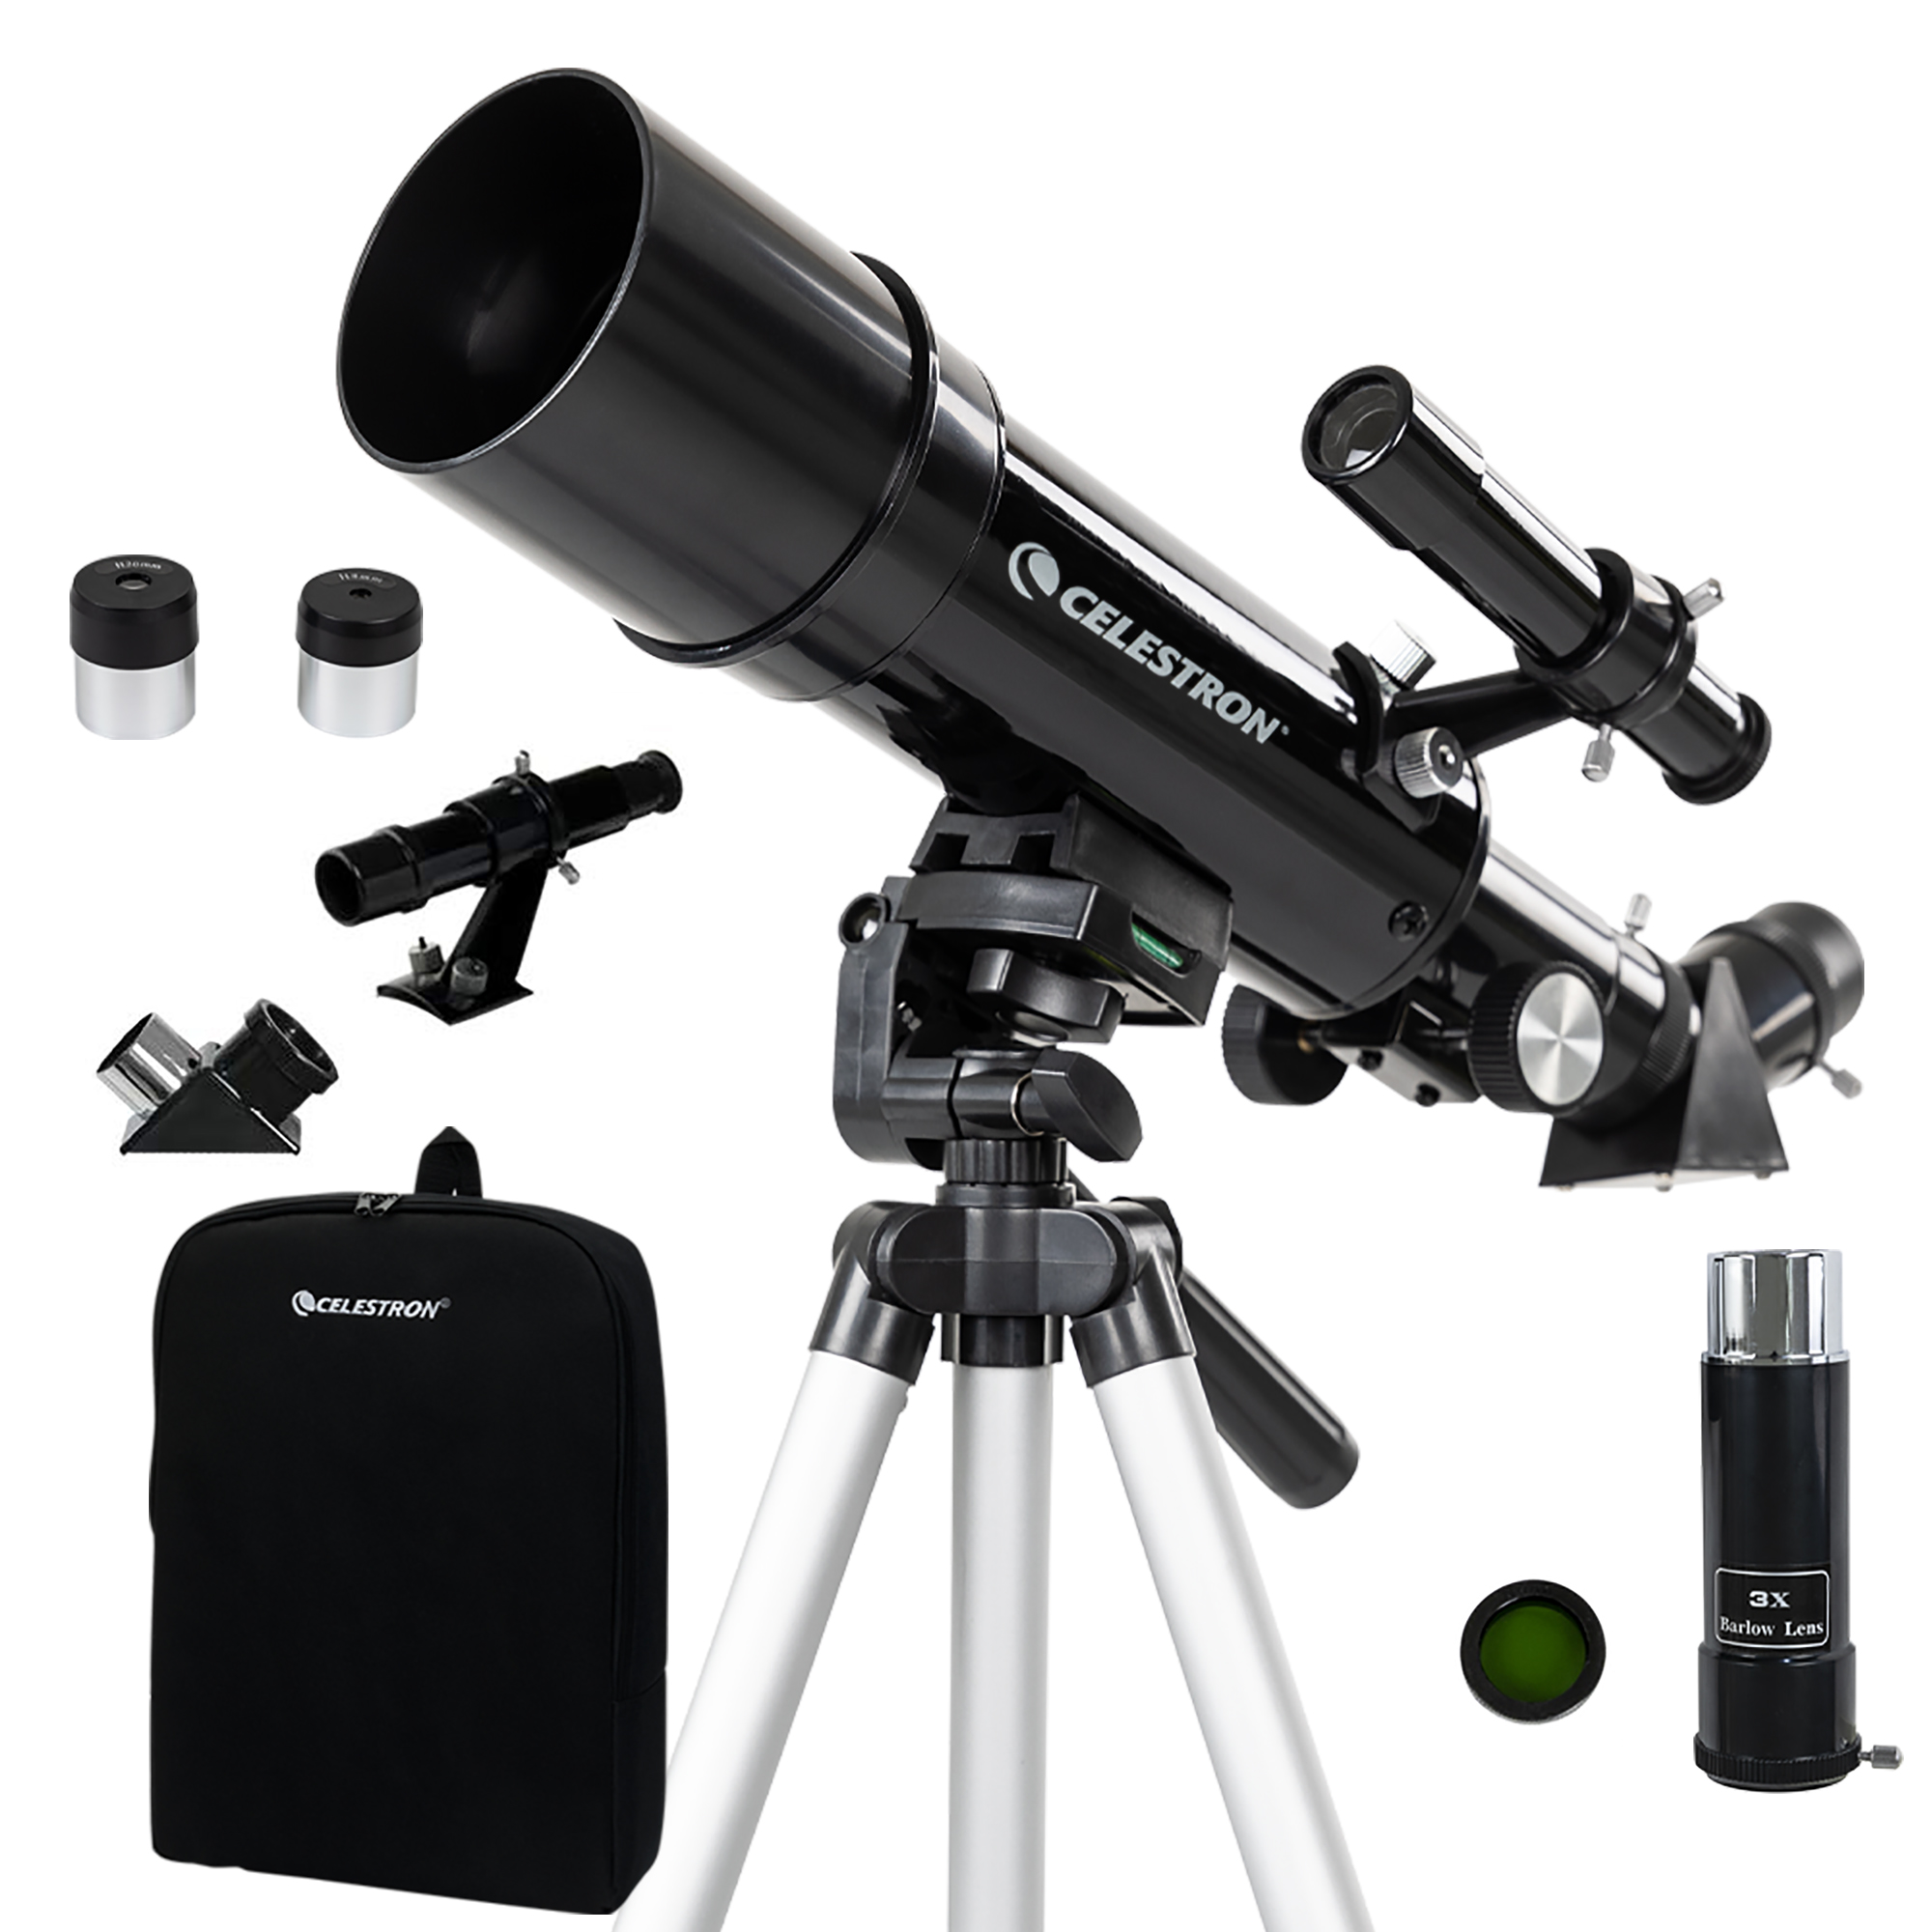 Celestron Travel Scope 60 Portable Telescope with Backpack and Tripod - image 1 of 10